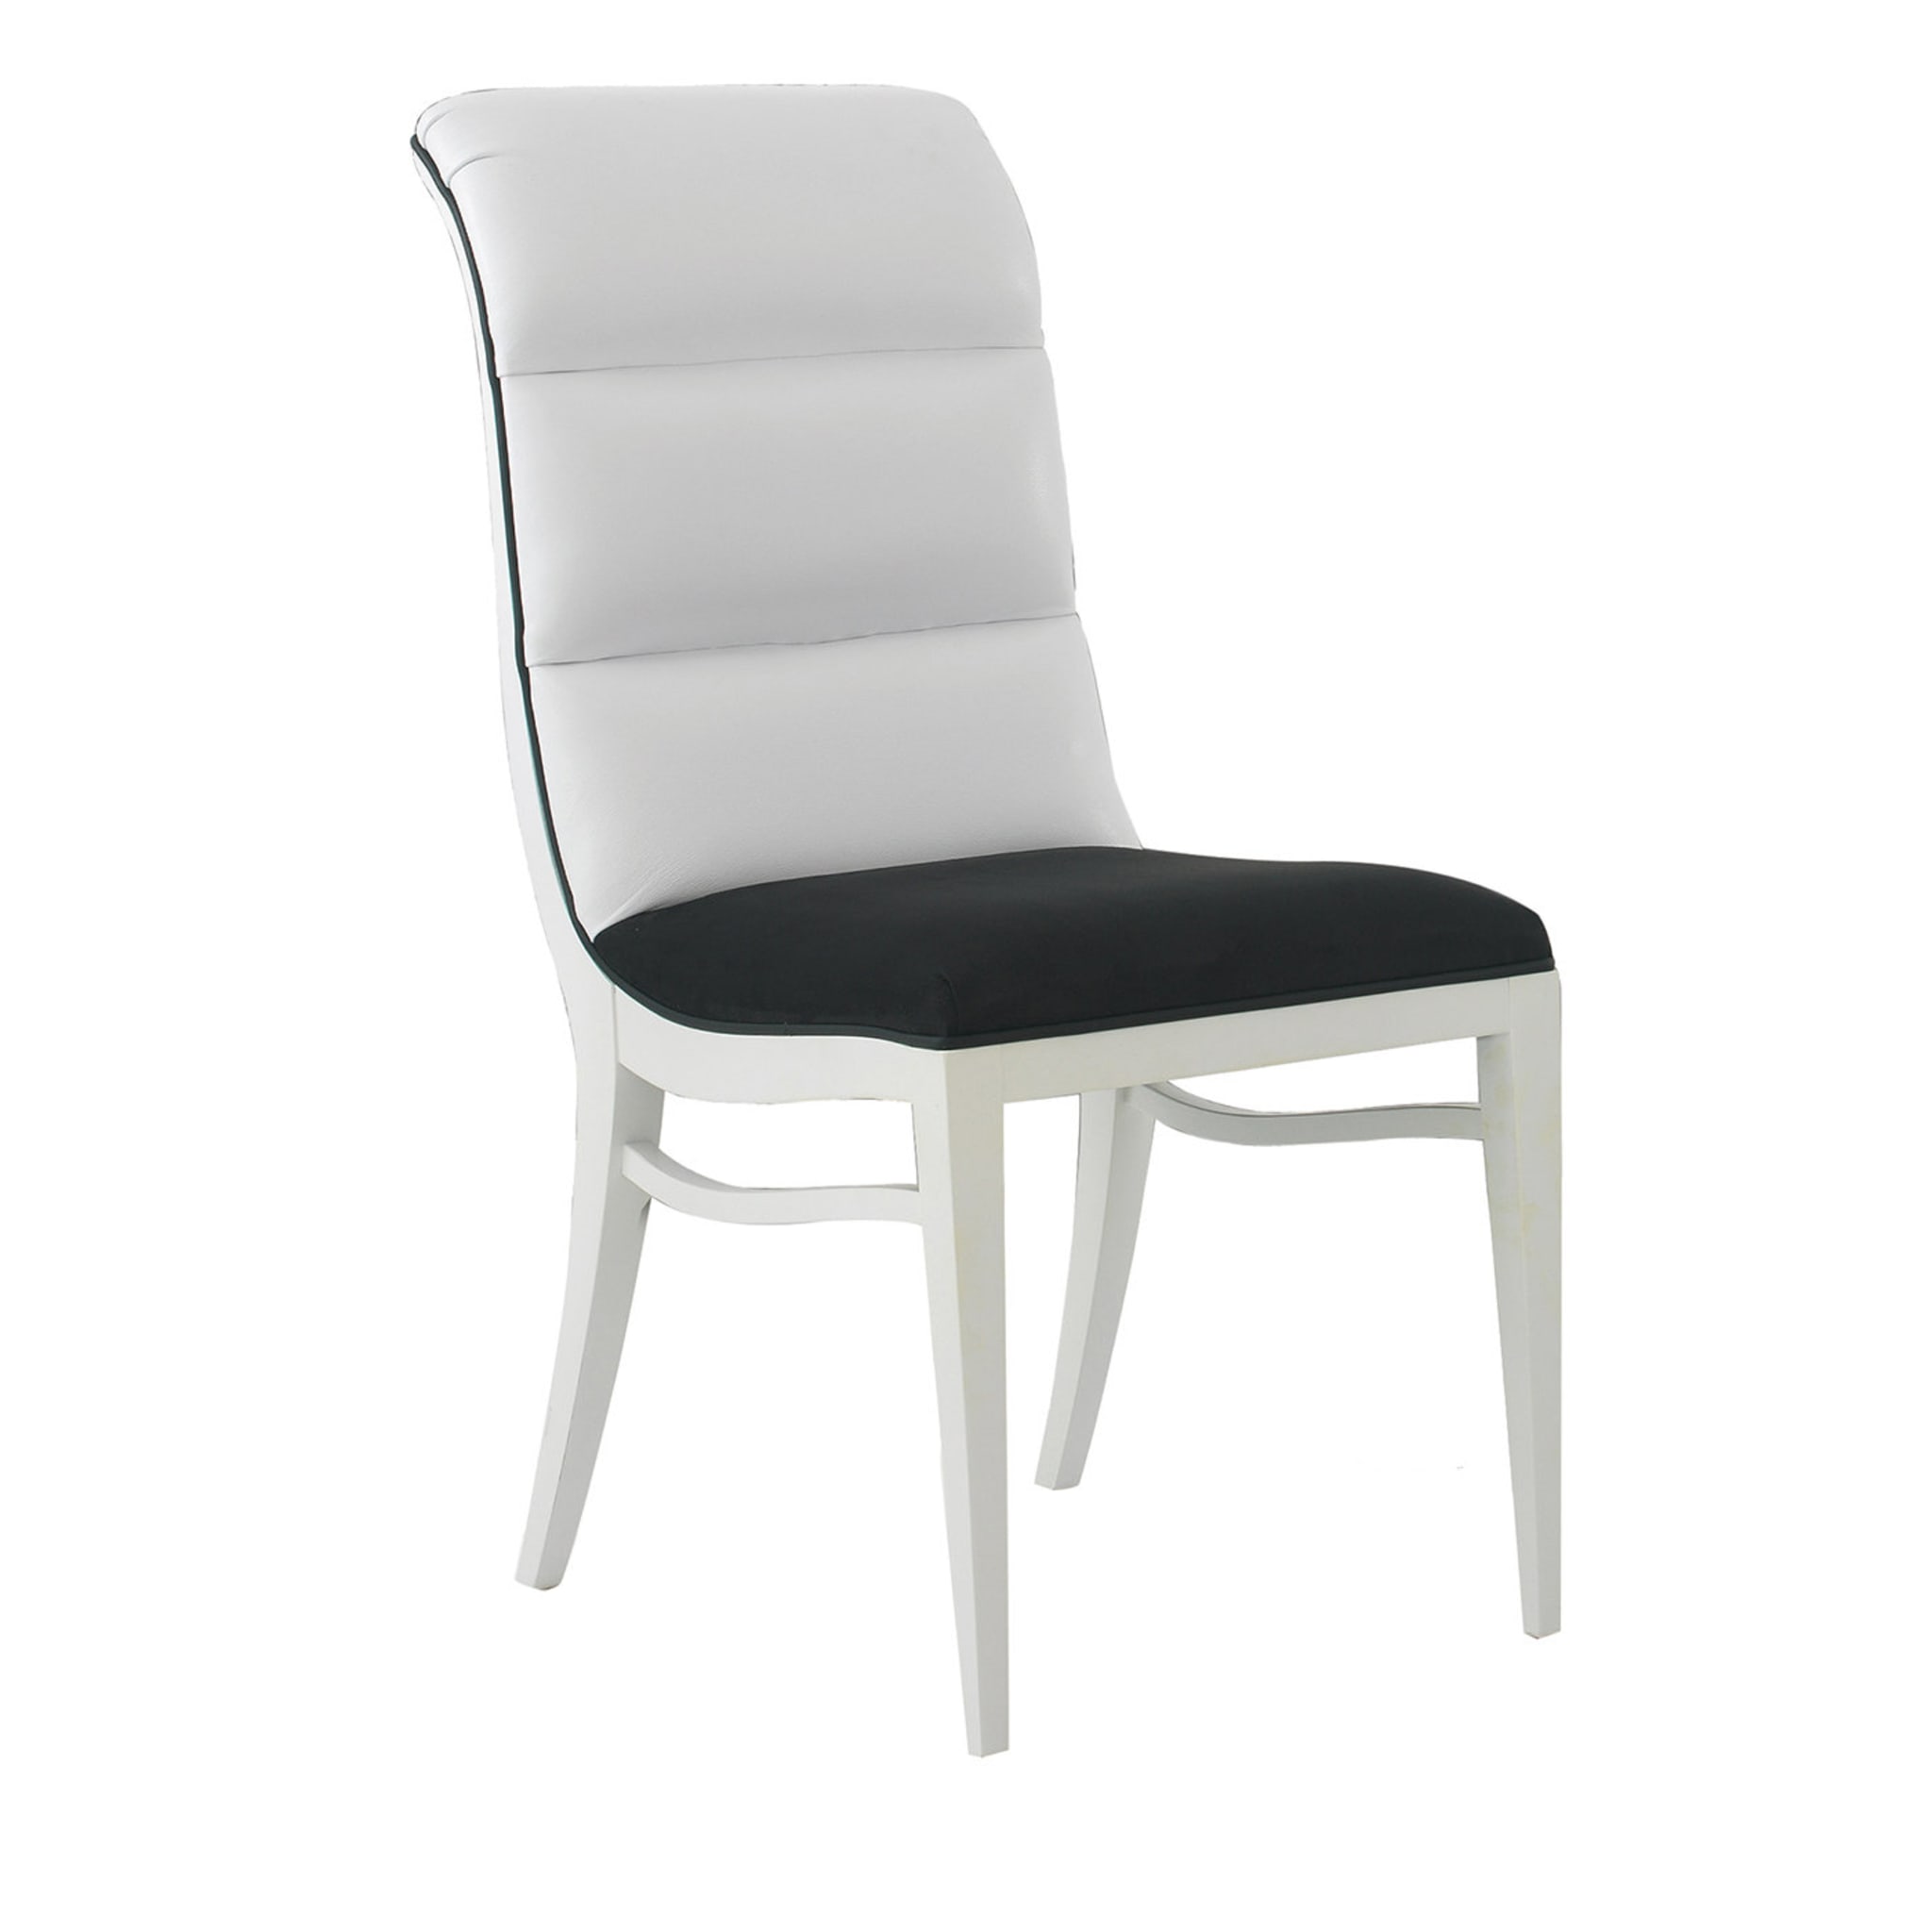 Set of 2 Black-And-White Chairs #1 - Main view